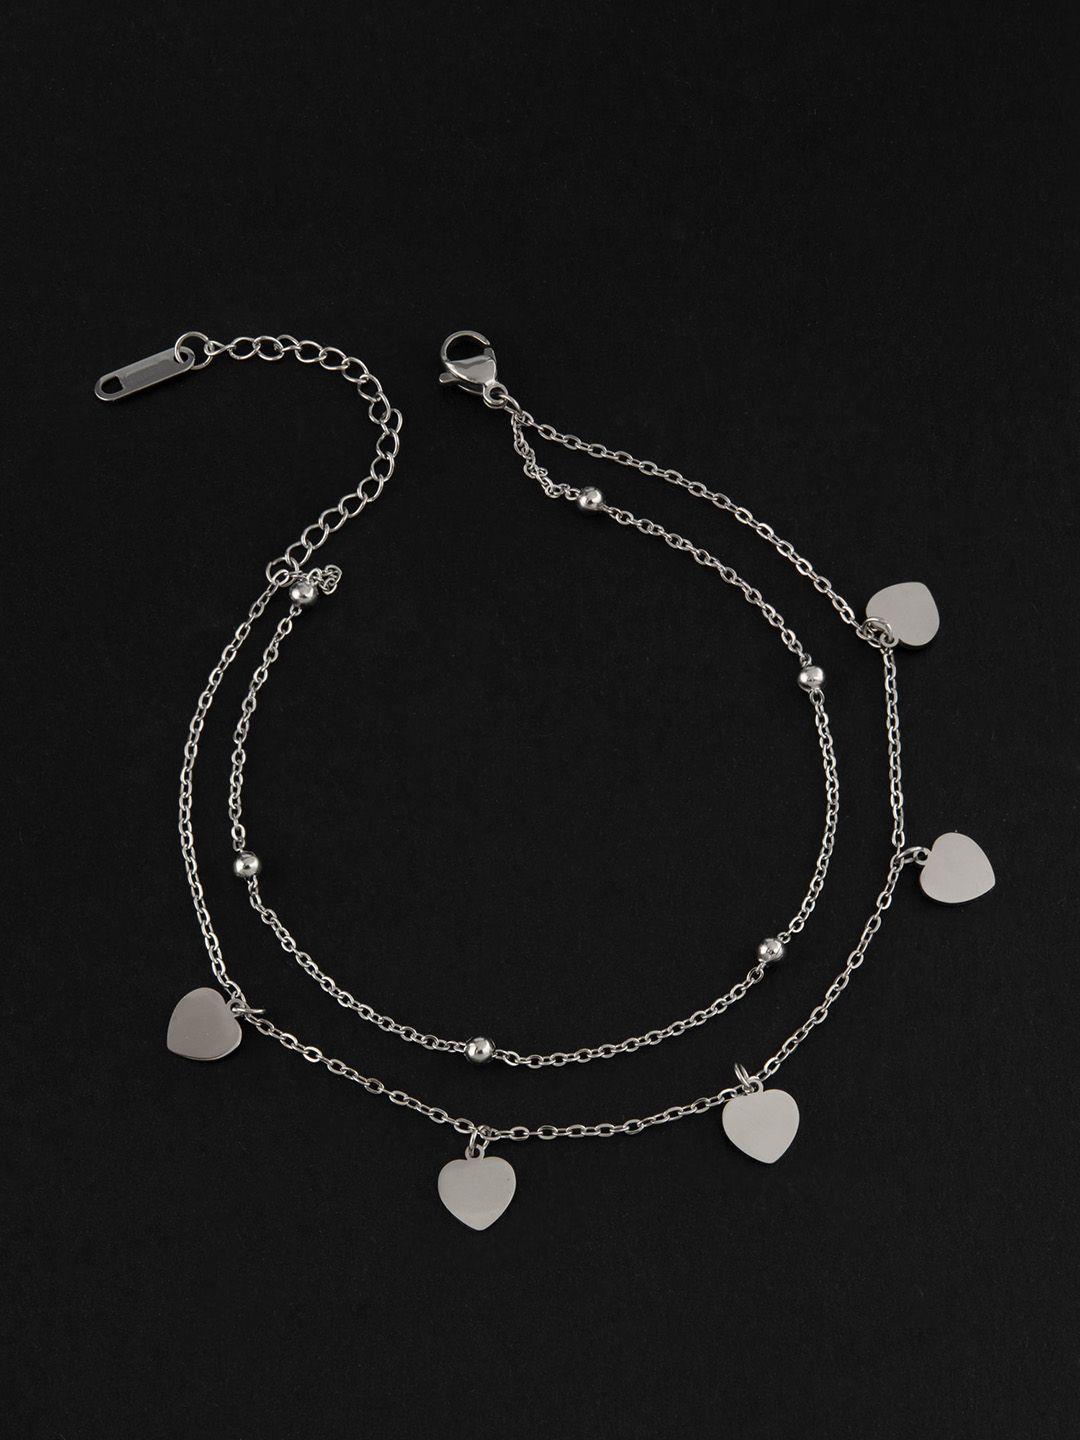 e2o rhodium-plated heart shaped charm anklet